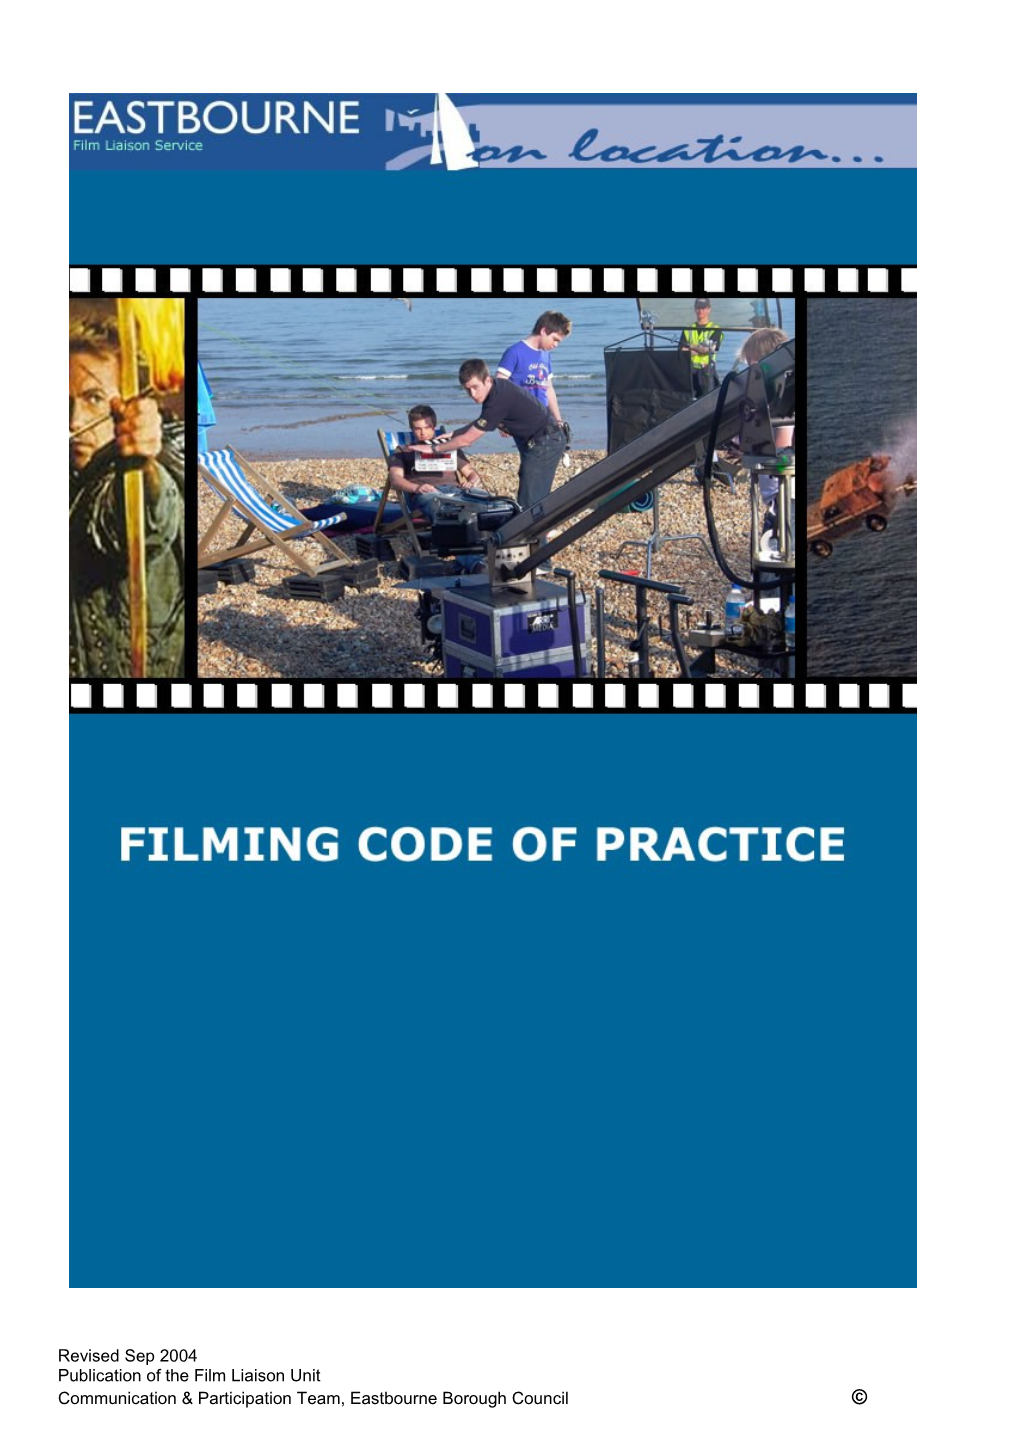 Requirements for Filming on the Streets Or Other Public Places in Eastbourne